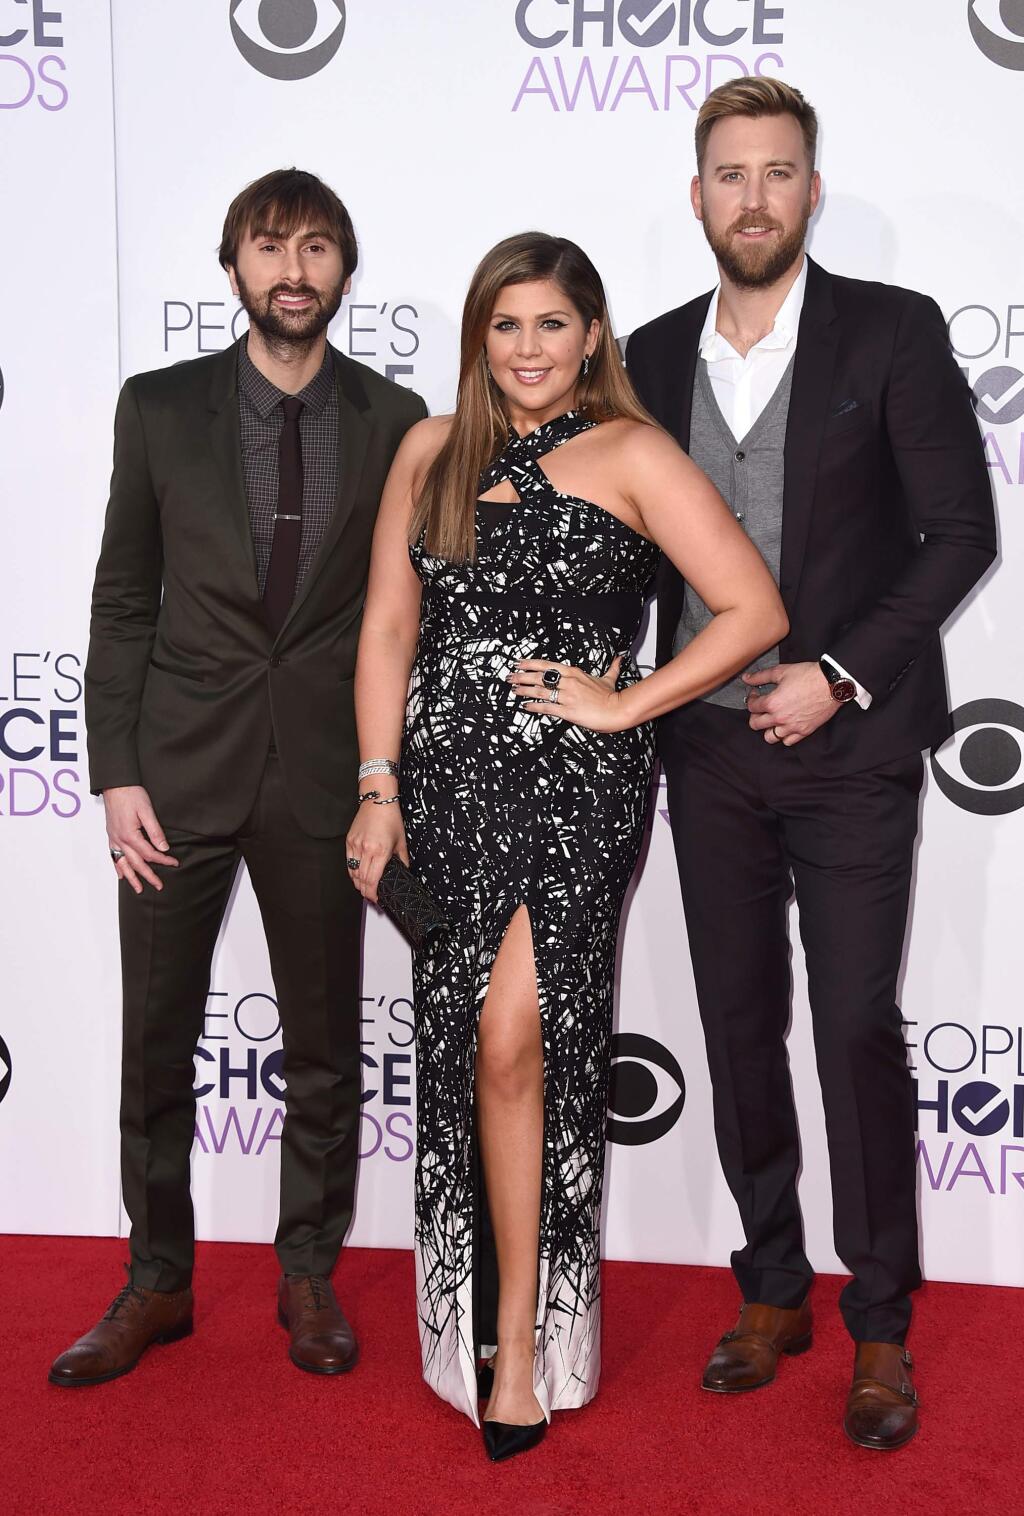 Dave Haywood, from left, Hillary Scott and Charles Kelley of Lady Antebellum arrive at the People's Choice Awards at the Nokia Theatre on Wednesday, Jan. 7, 2015, in Los Angeles. (Photo by Jordan Strauss/Invision/AP)